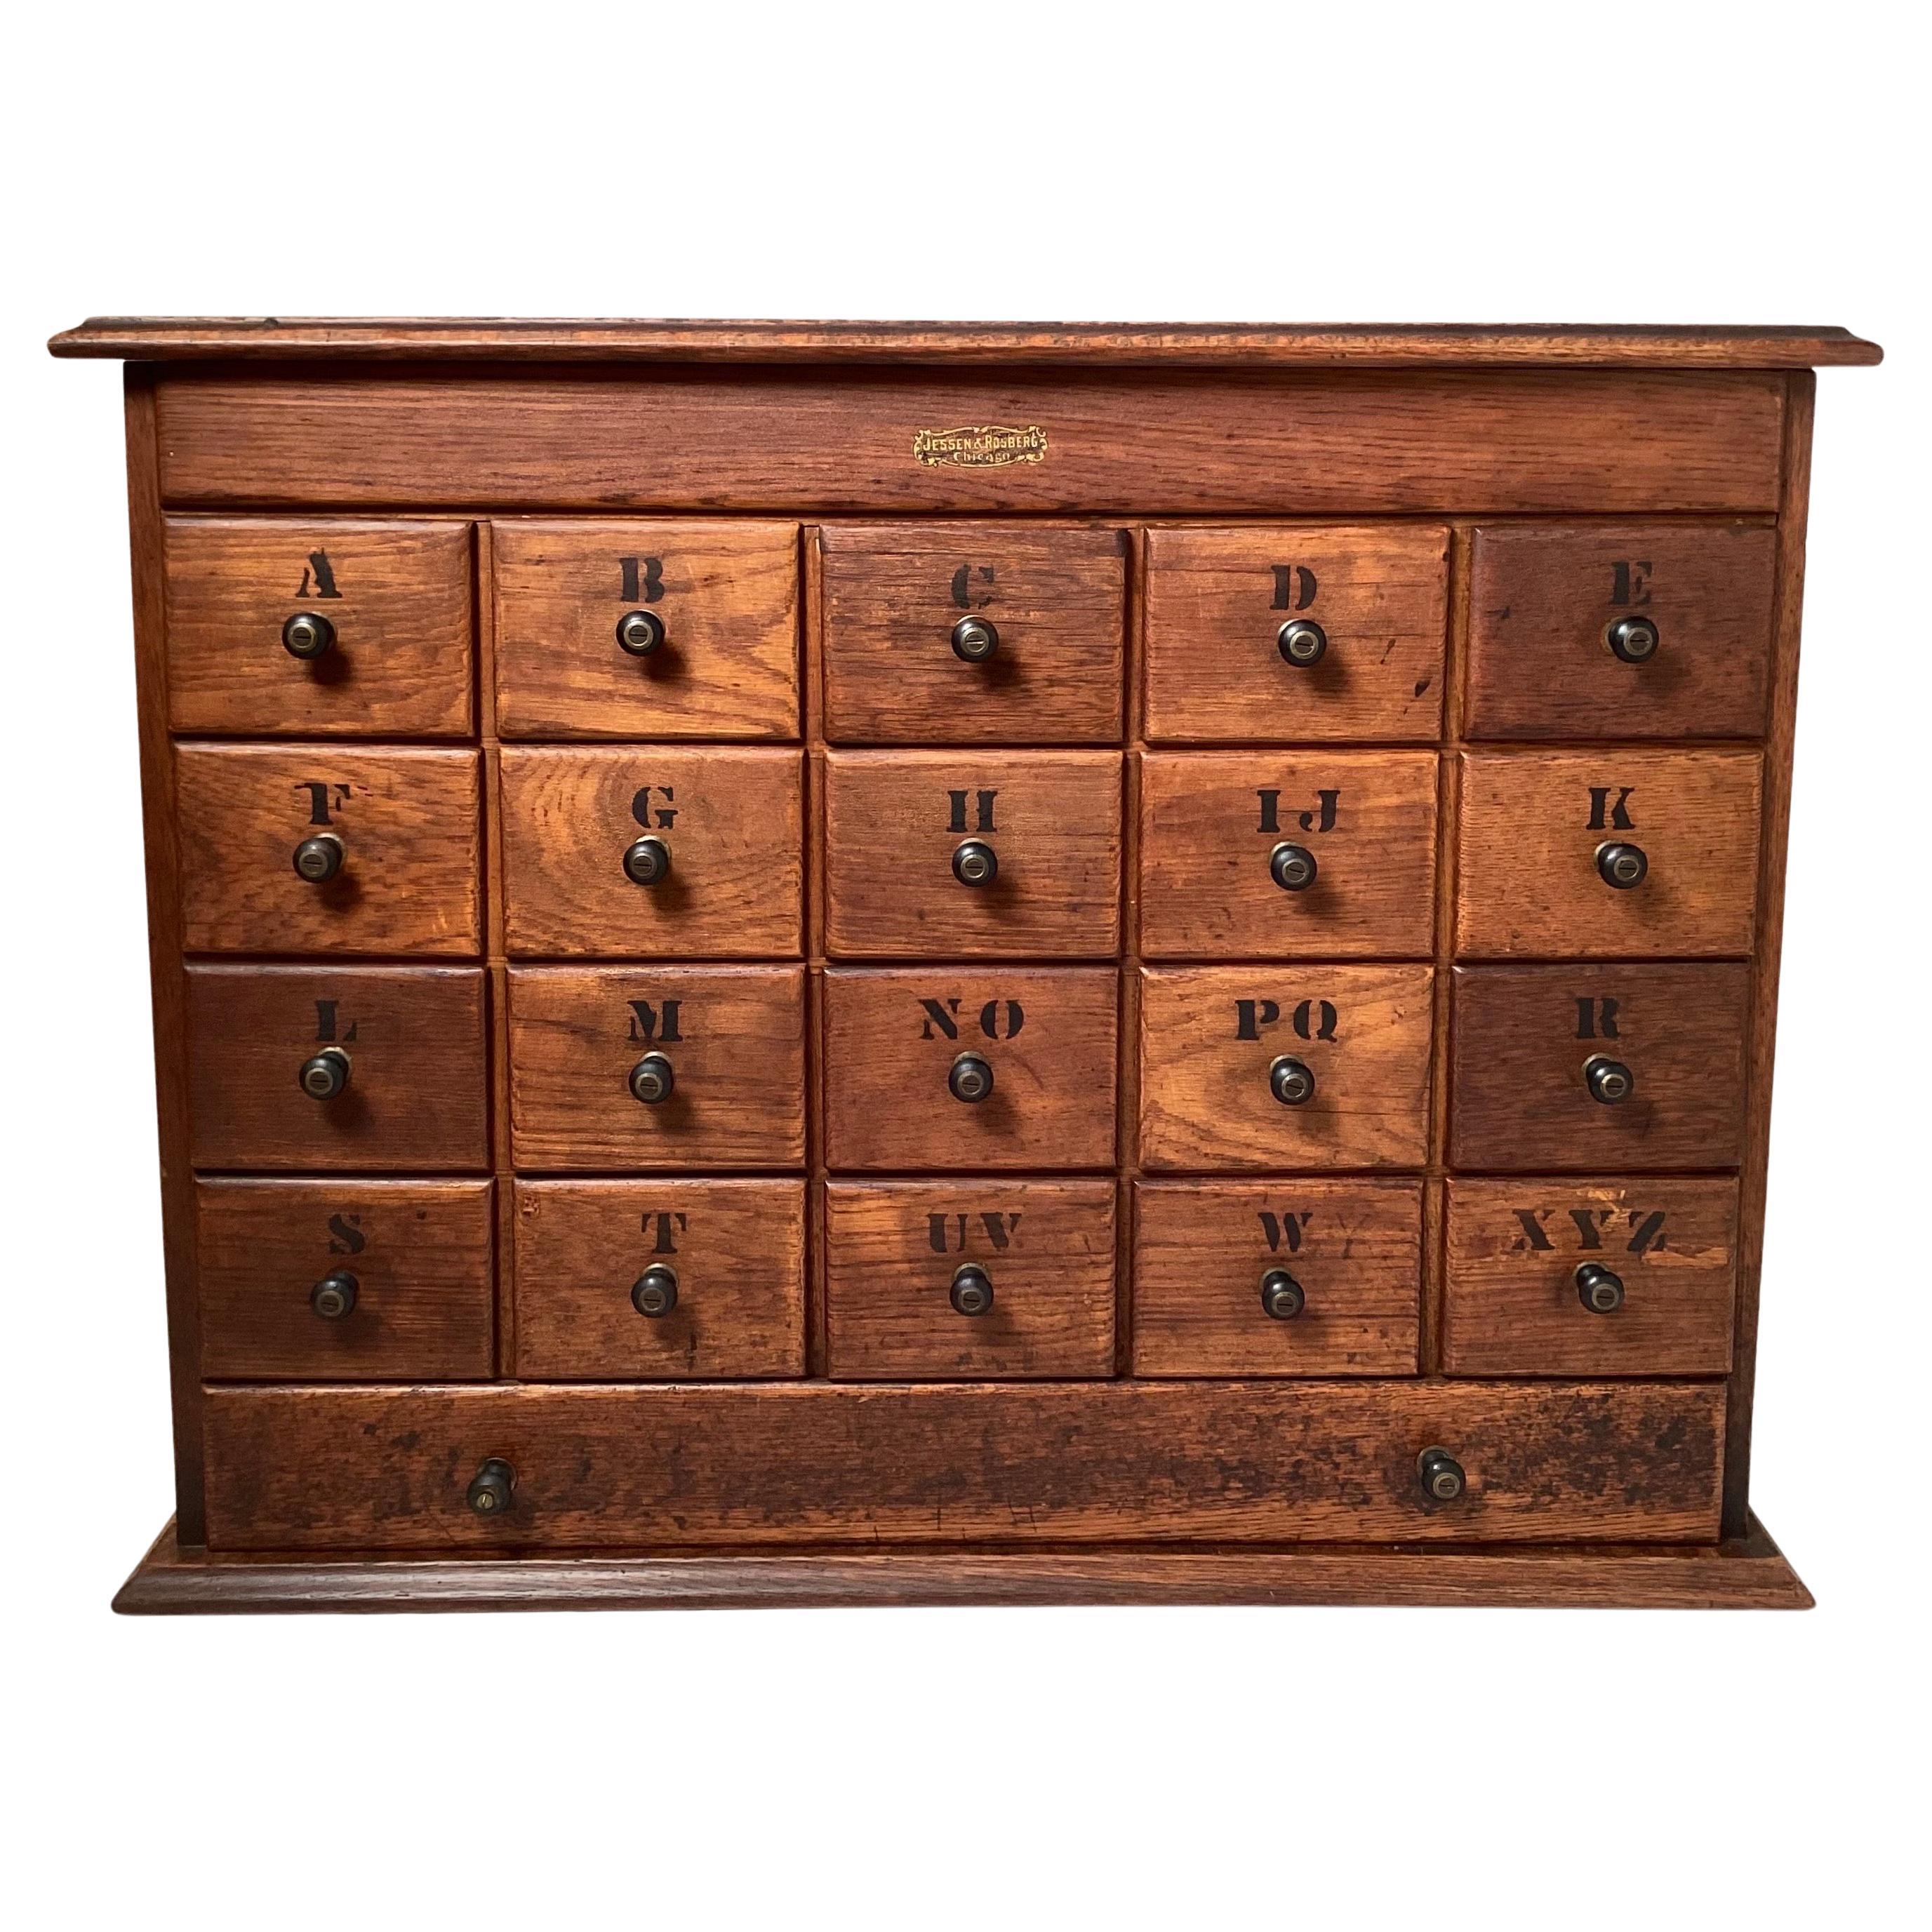 An Early 20th Century Oak Apothecary Cabinet